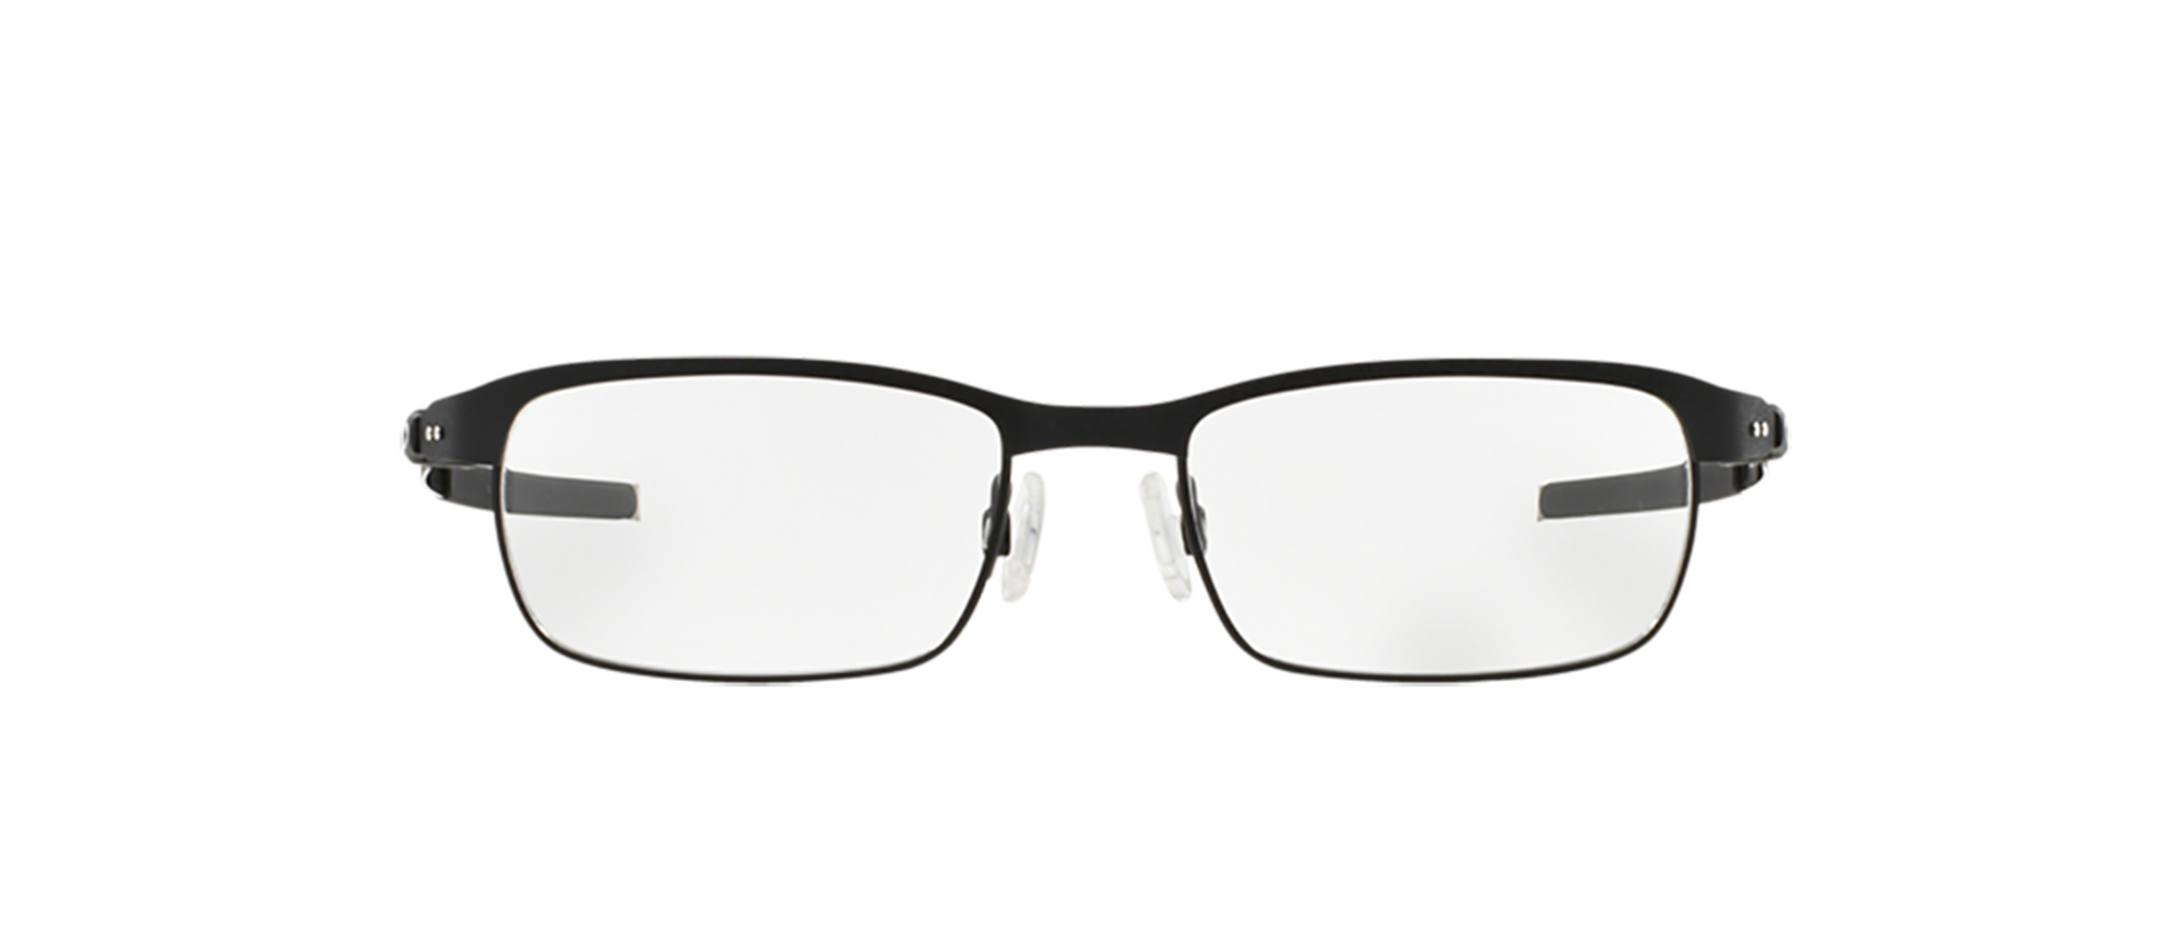 Oakley OX3184 Glasses | Free Shipping and Returns | Eyeconic